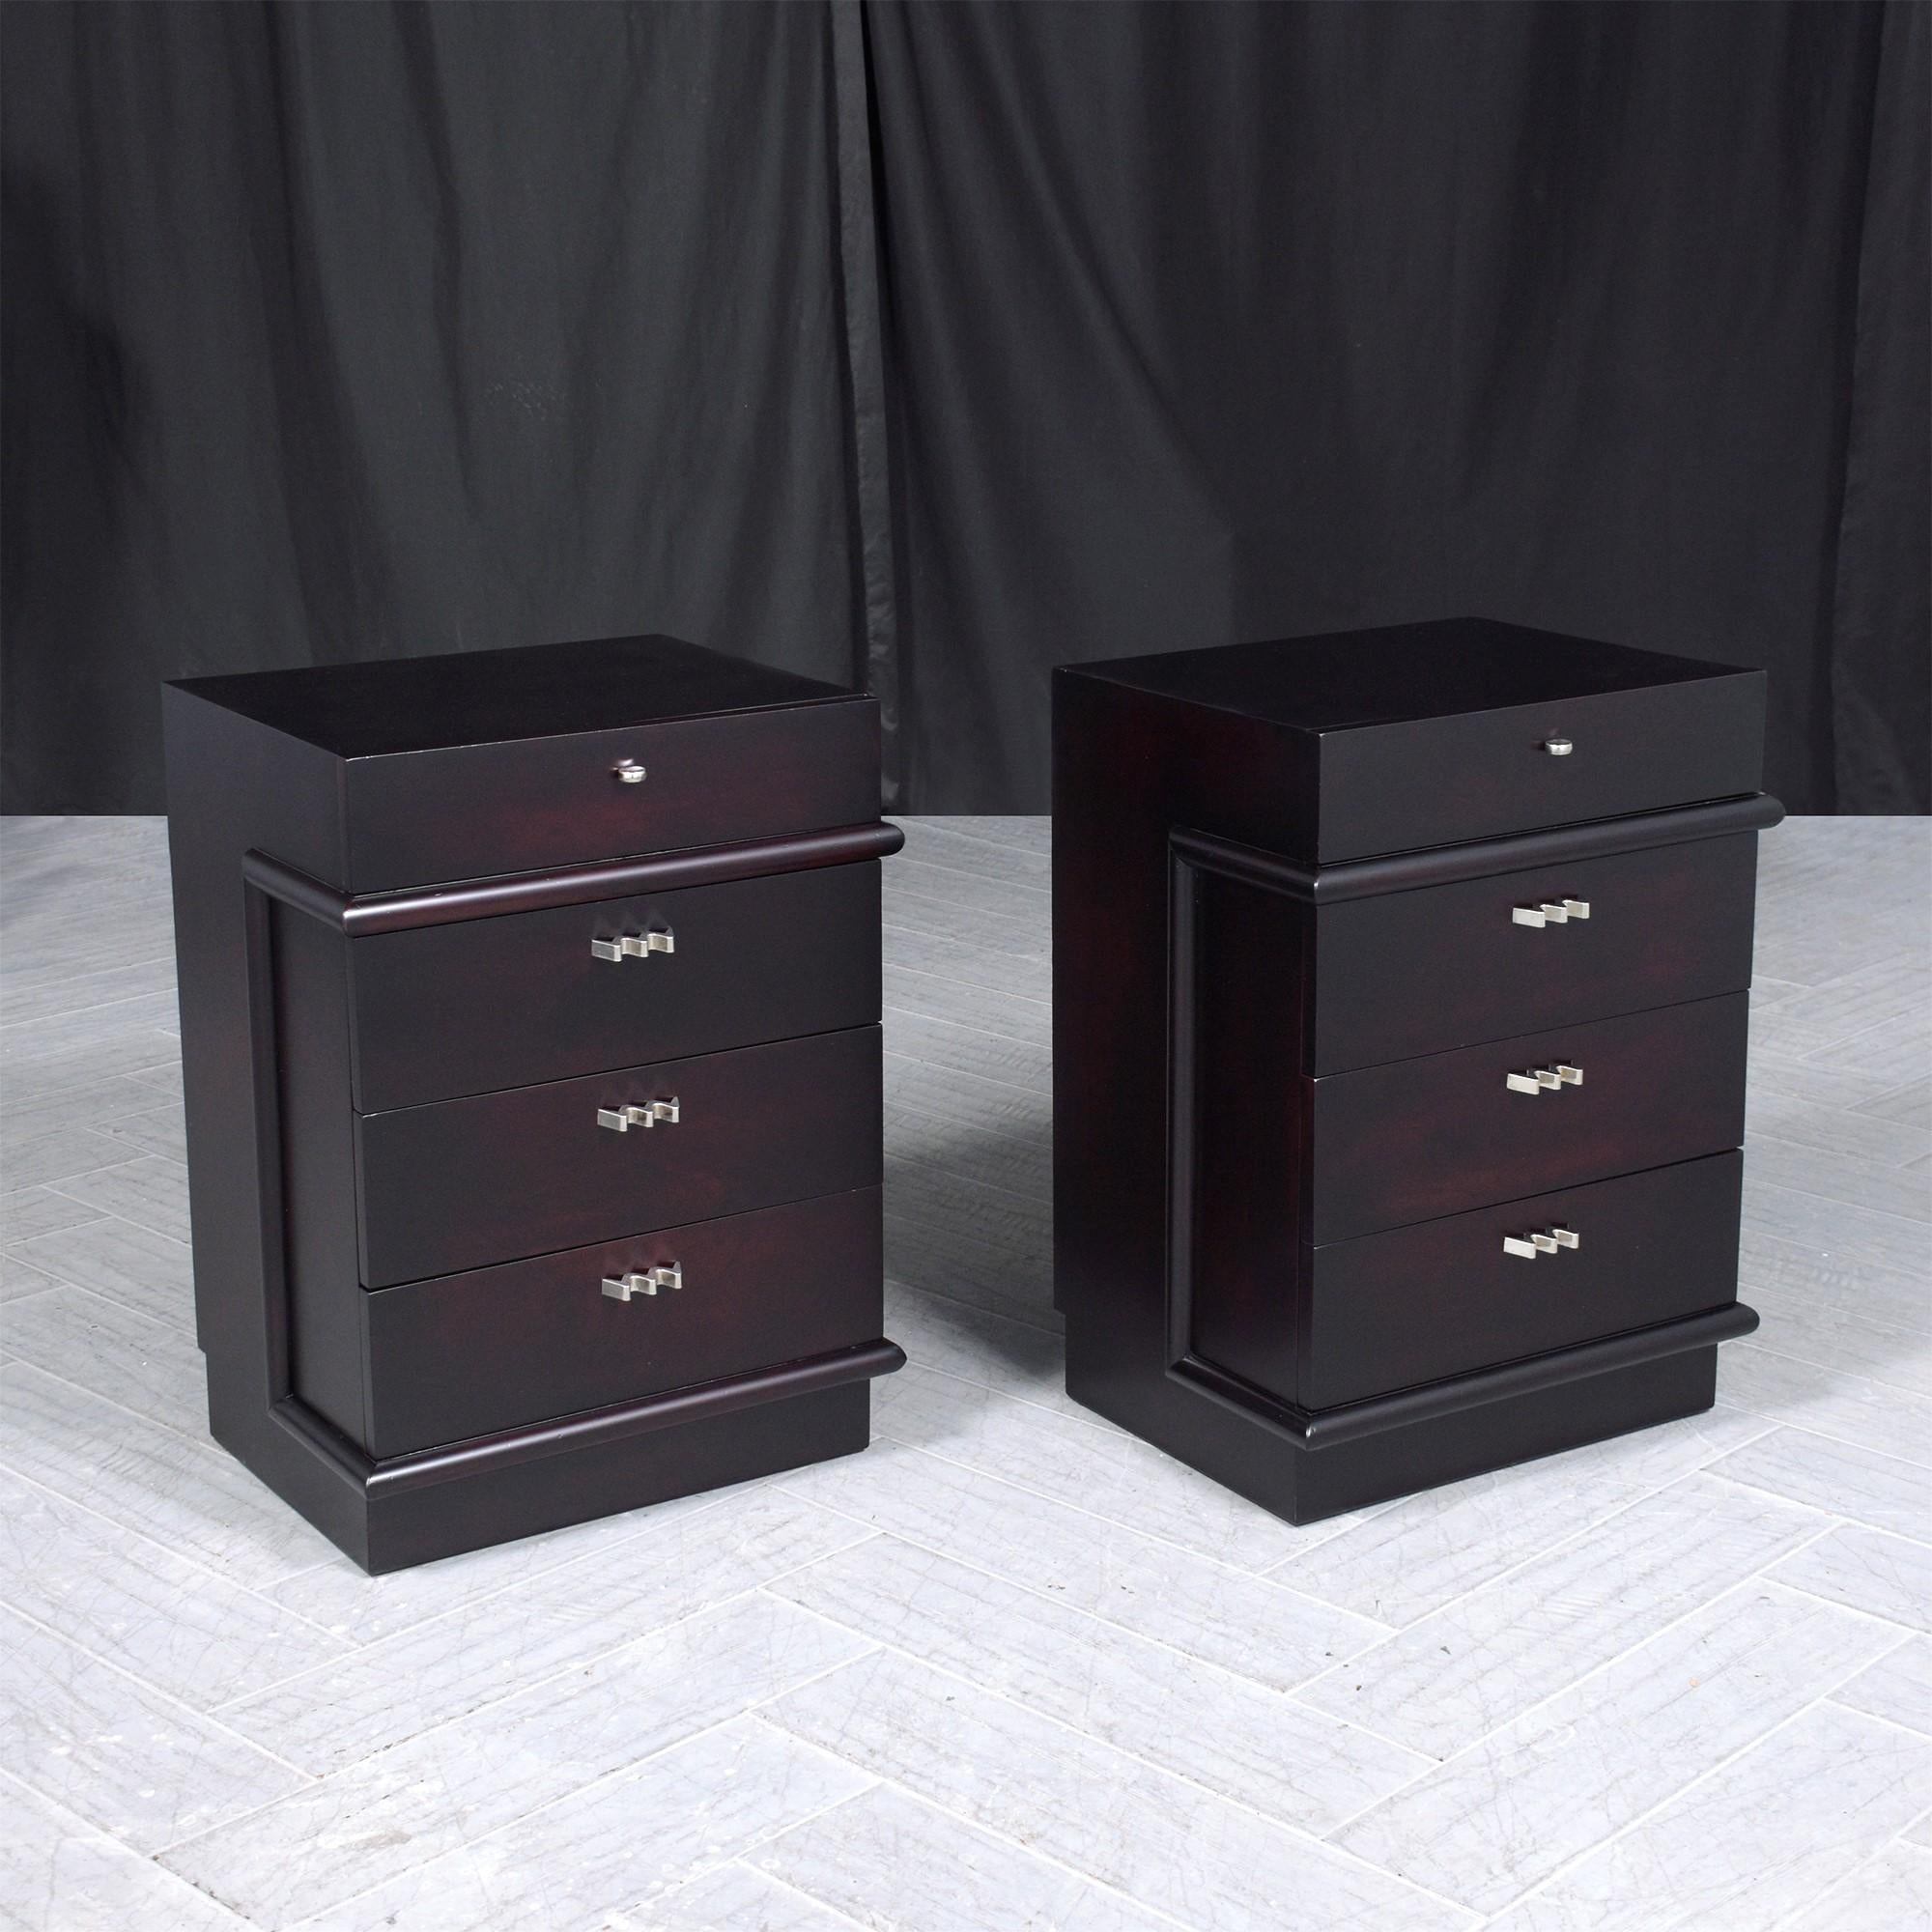 Step into the world of mid-century modern design with our exquisitely restored pair of nightstands by American of Martinsville. These nightstands are crafted from high-quality mahogany and have been meticulously revived to highlight their elegant